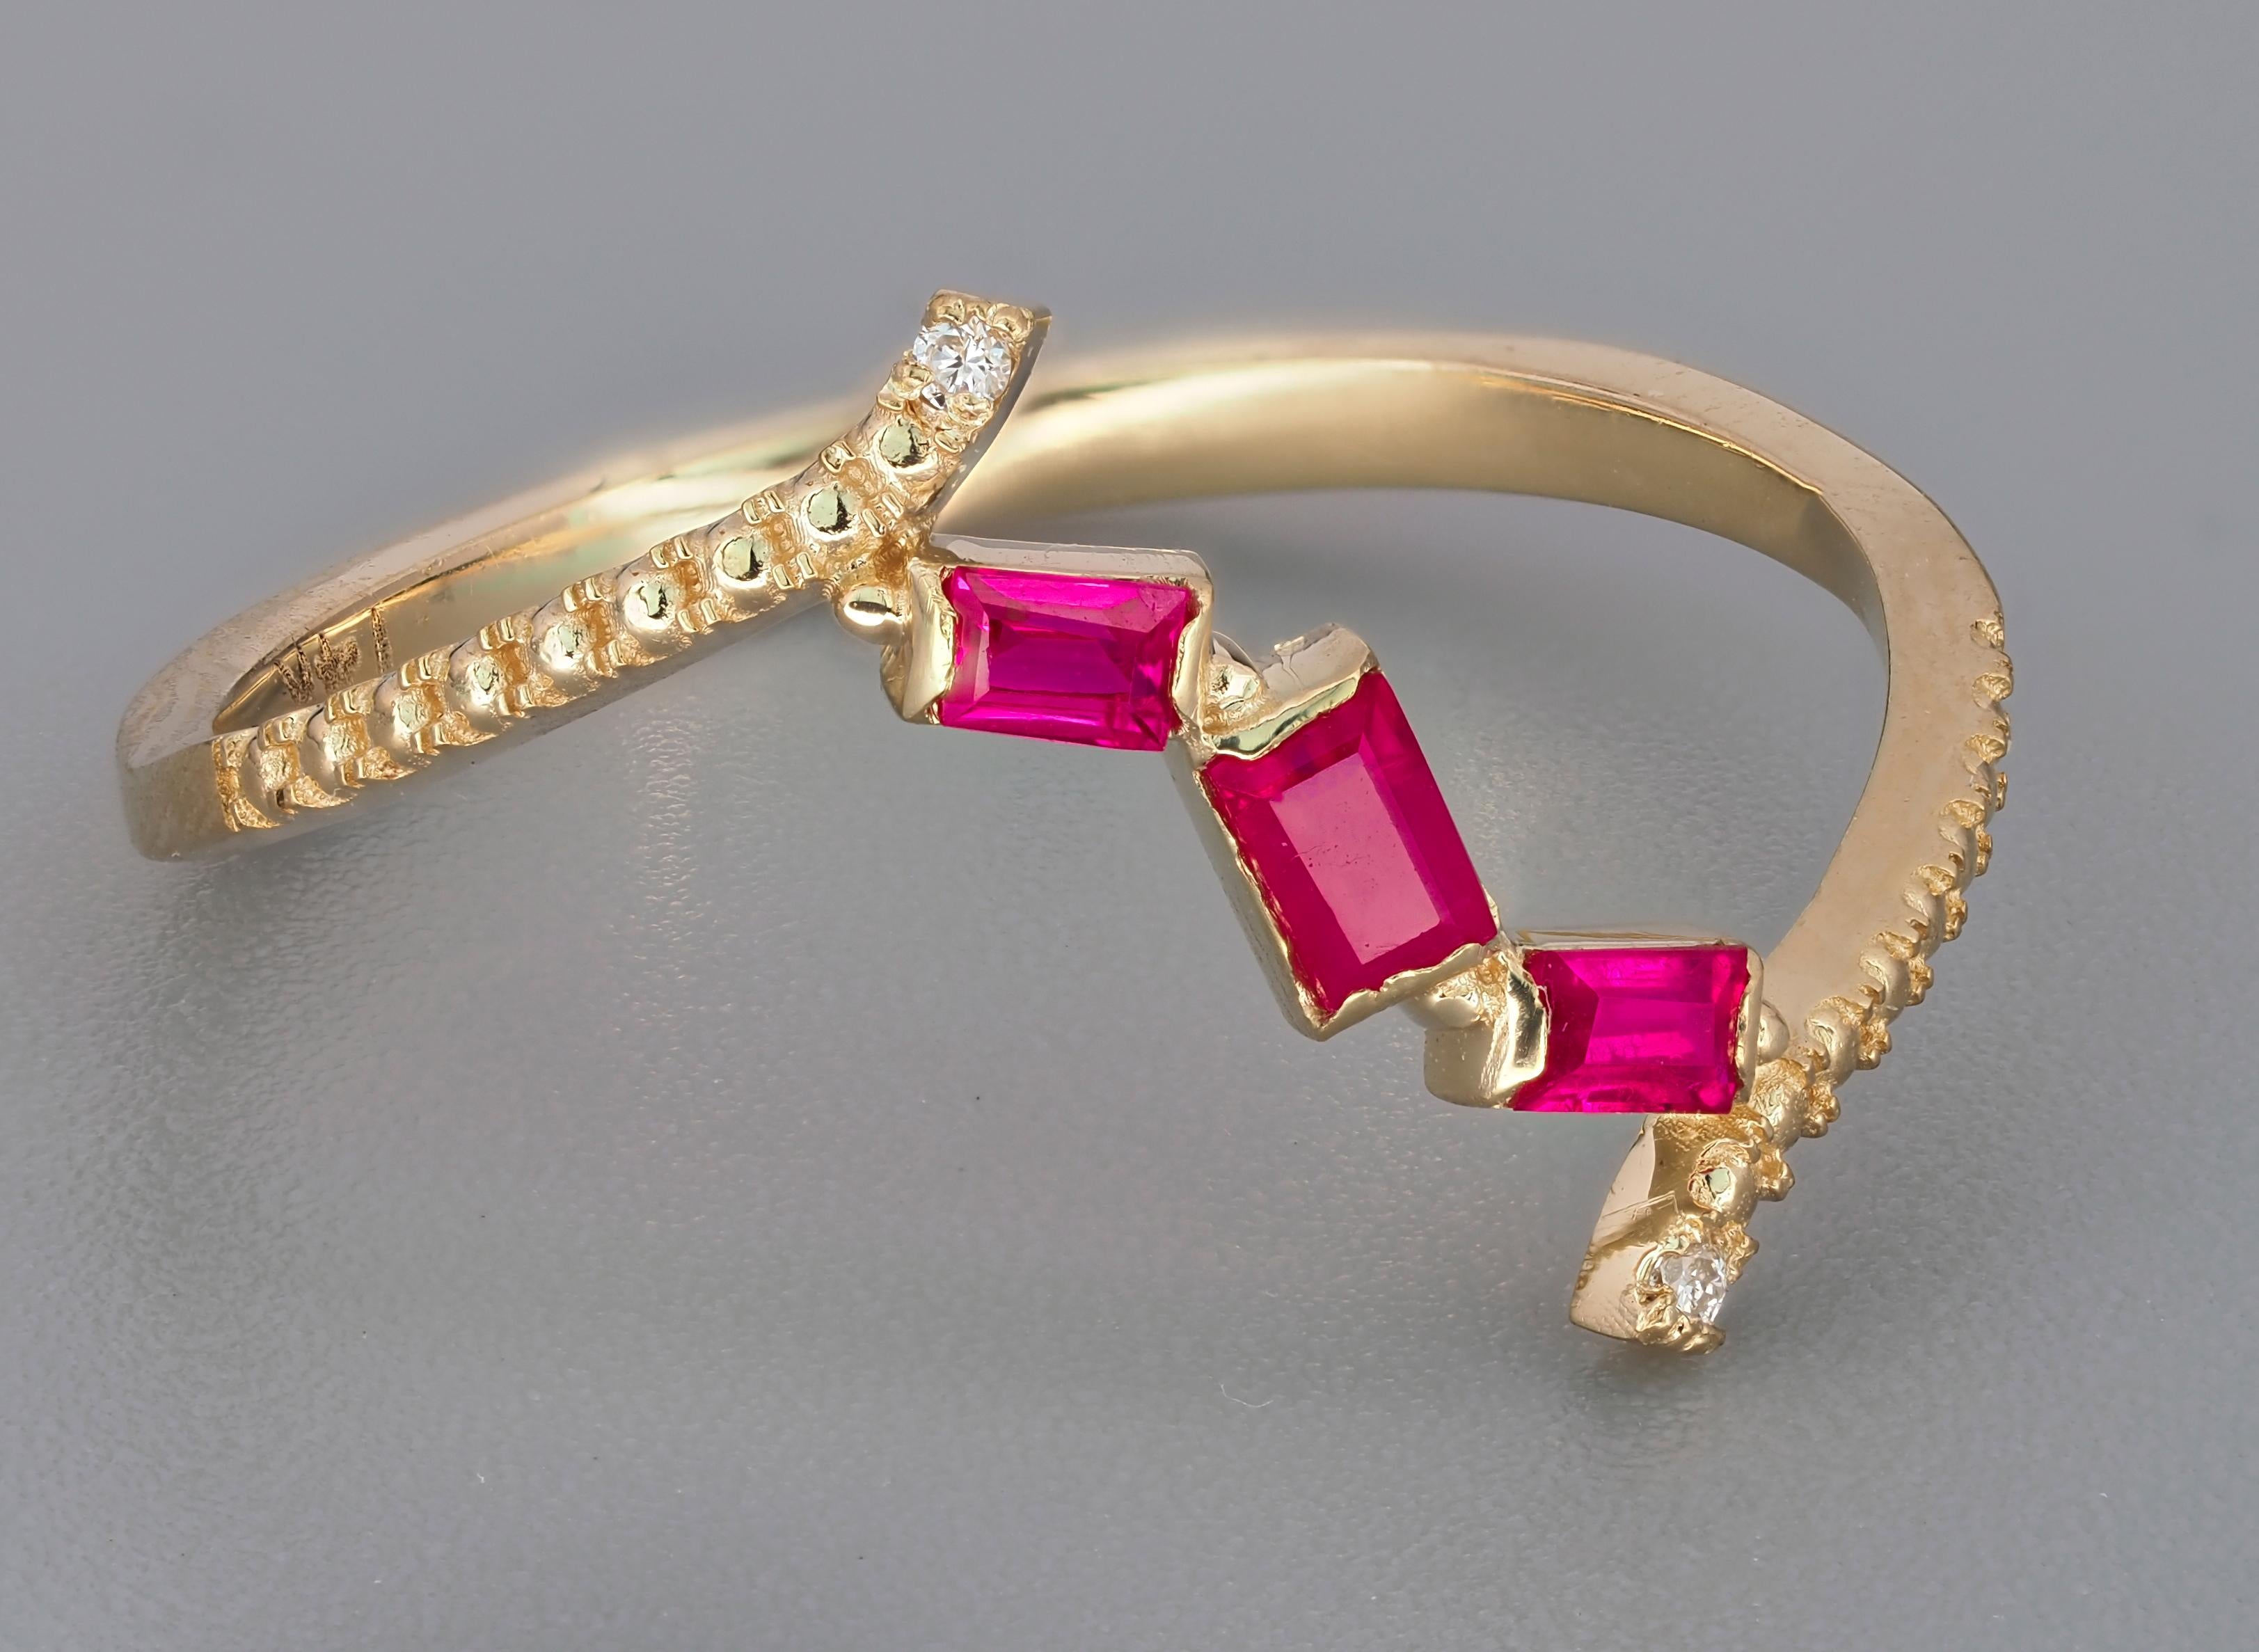 For Sale:  14k Gold Ring with Rubies and Diamonds. Baguette ruby ring. 2